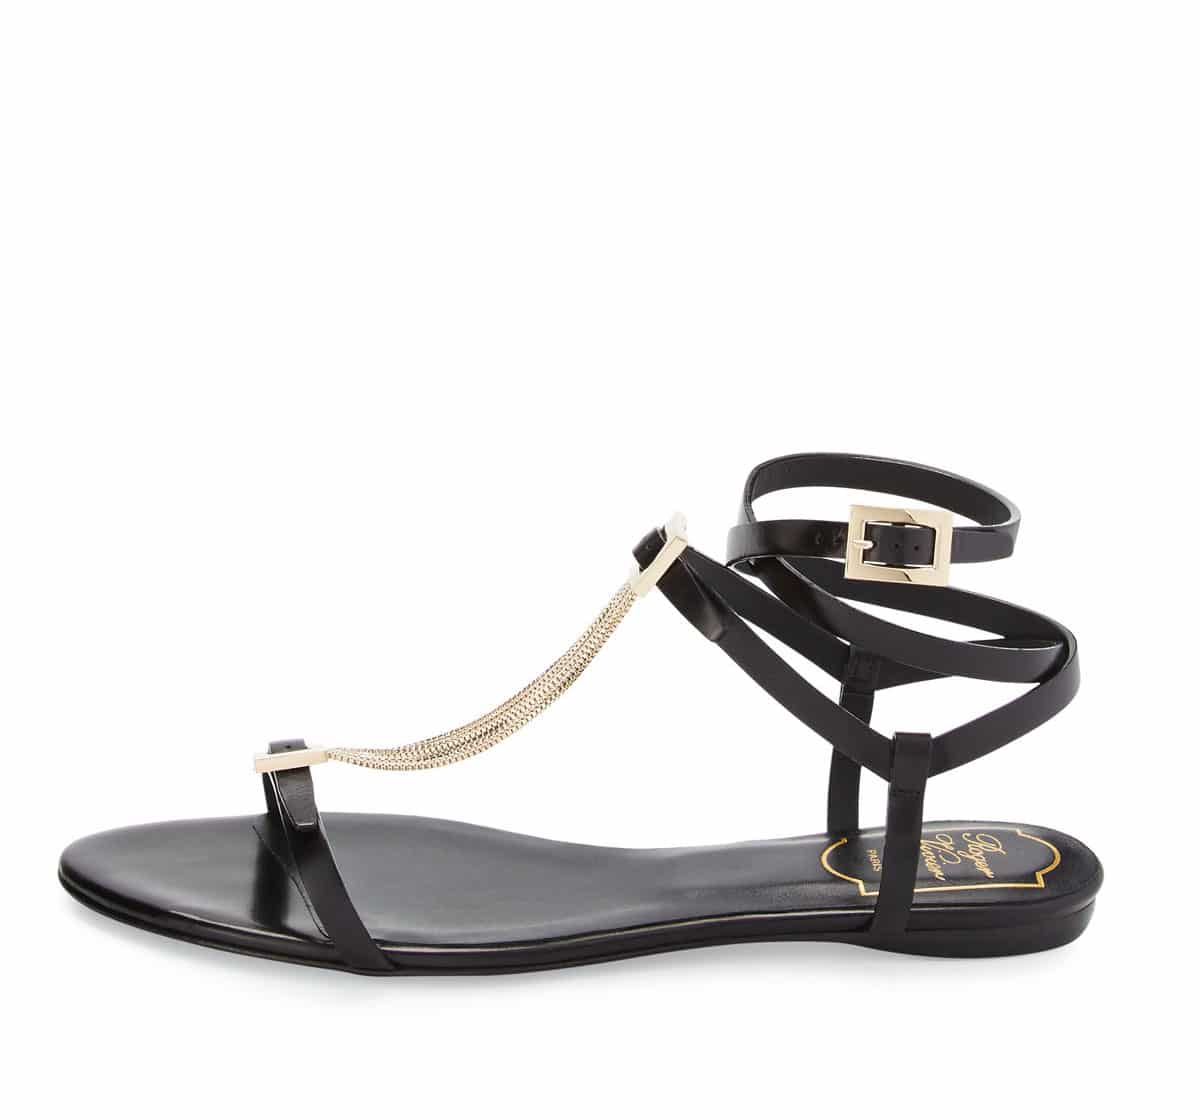 Shop Flat Chain Sandals From Spring/Summer 2016 | Spotted Fashion